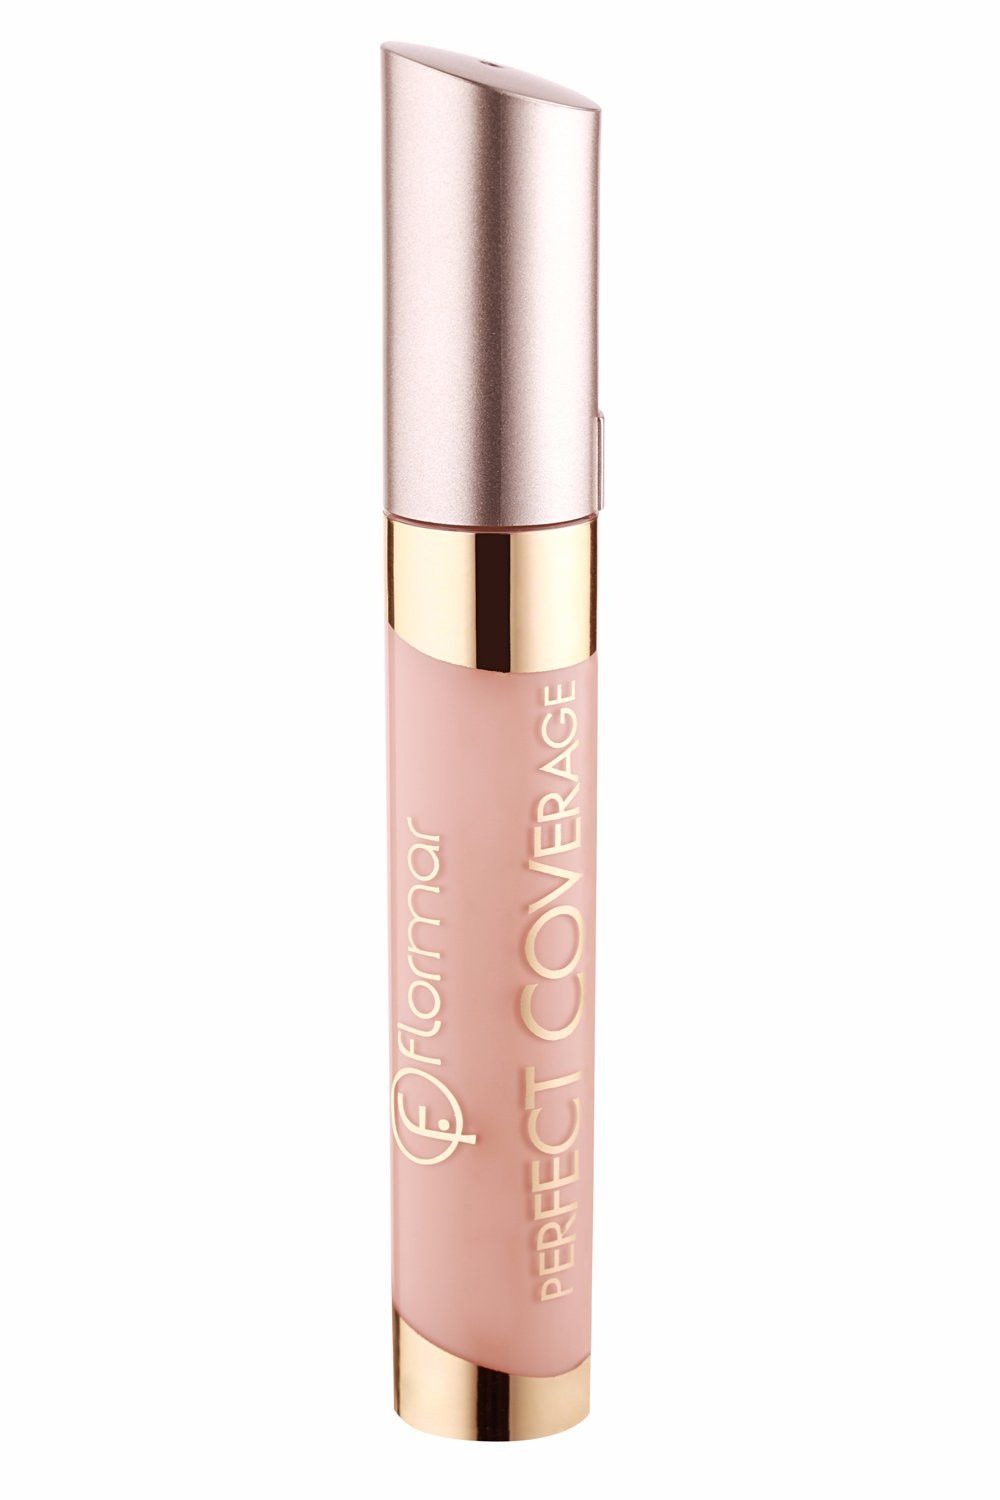 https://www.babystore.ae/storage//products_images/f/l/flormar-perfect-coverage-concealer-03-light-beige.jpg